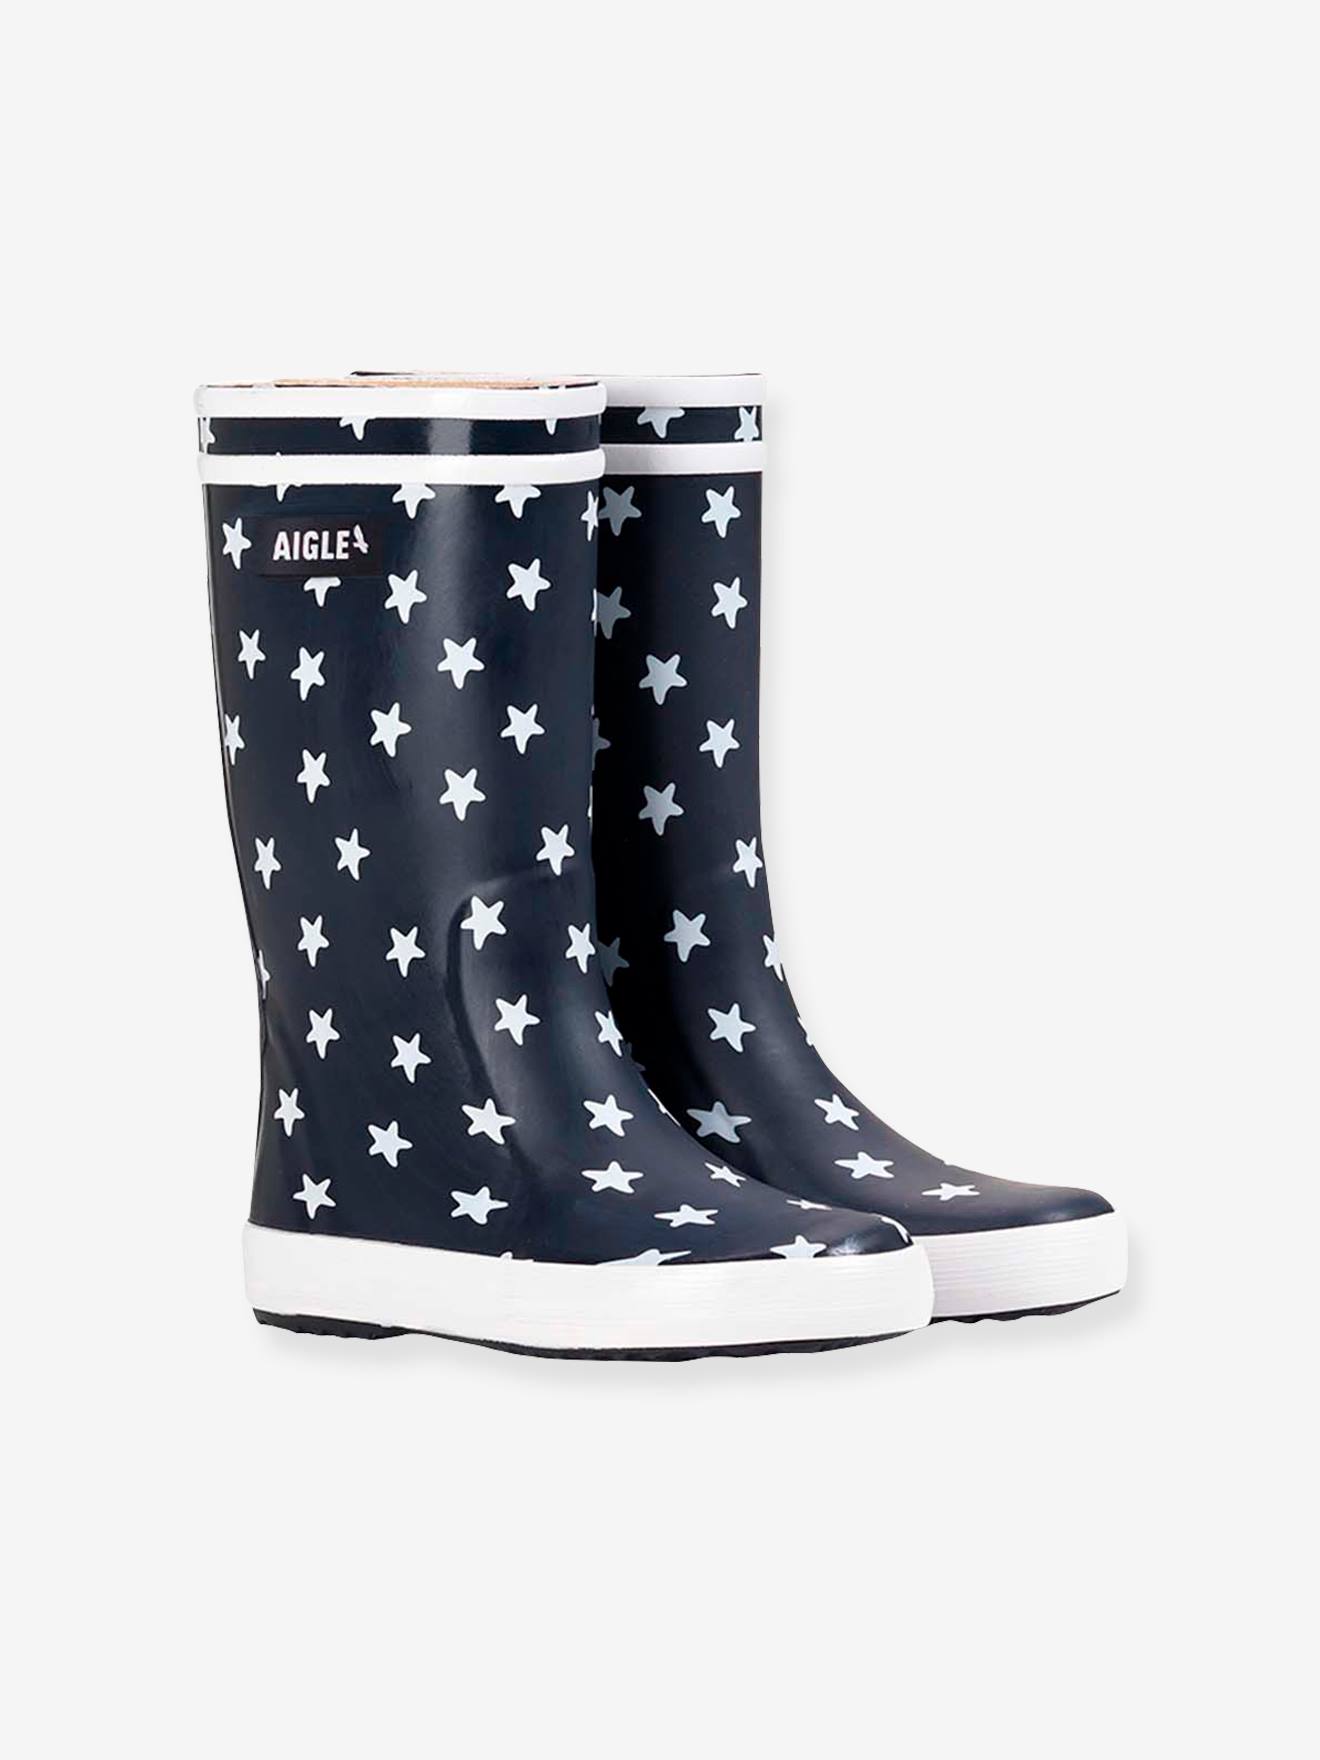 Wellies for Kids, Lolly Pop Play by AIGLE(r) navy blue